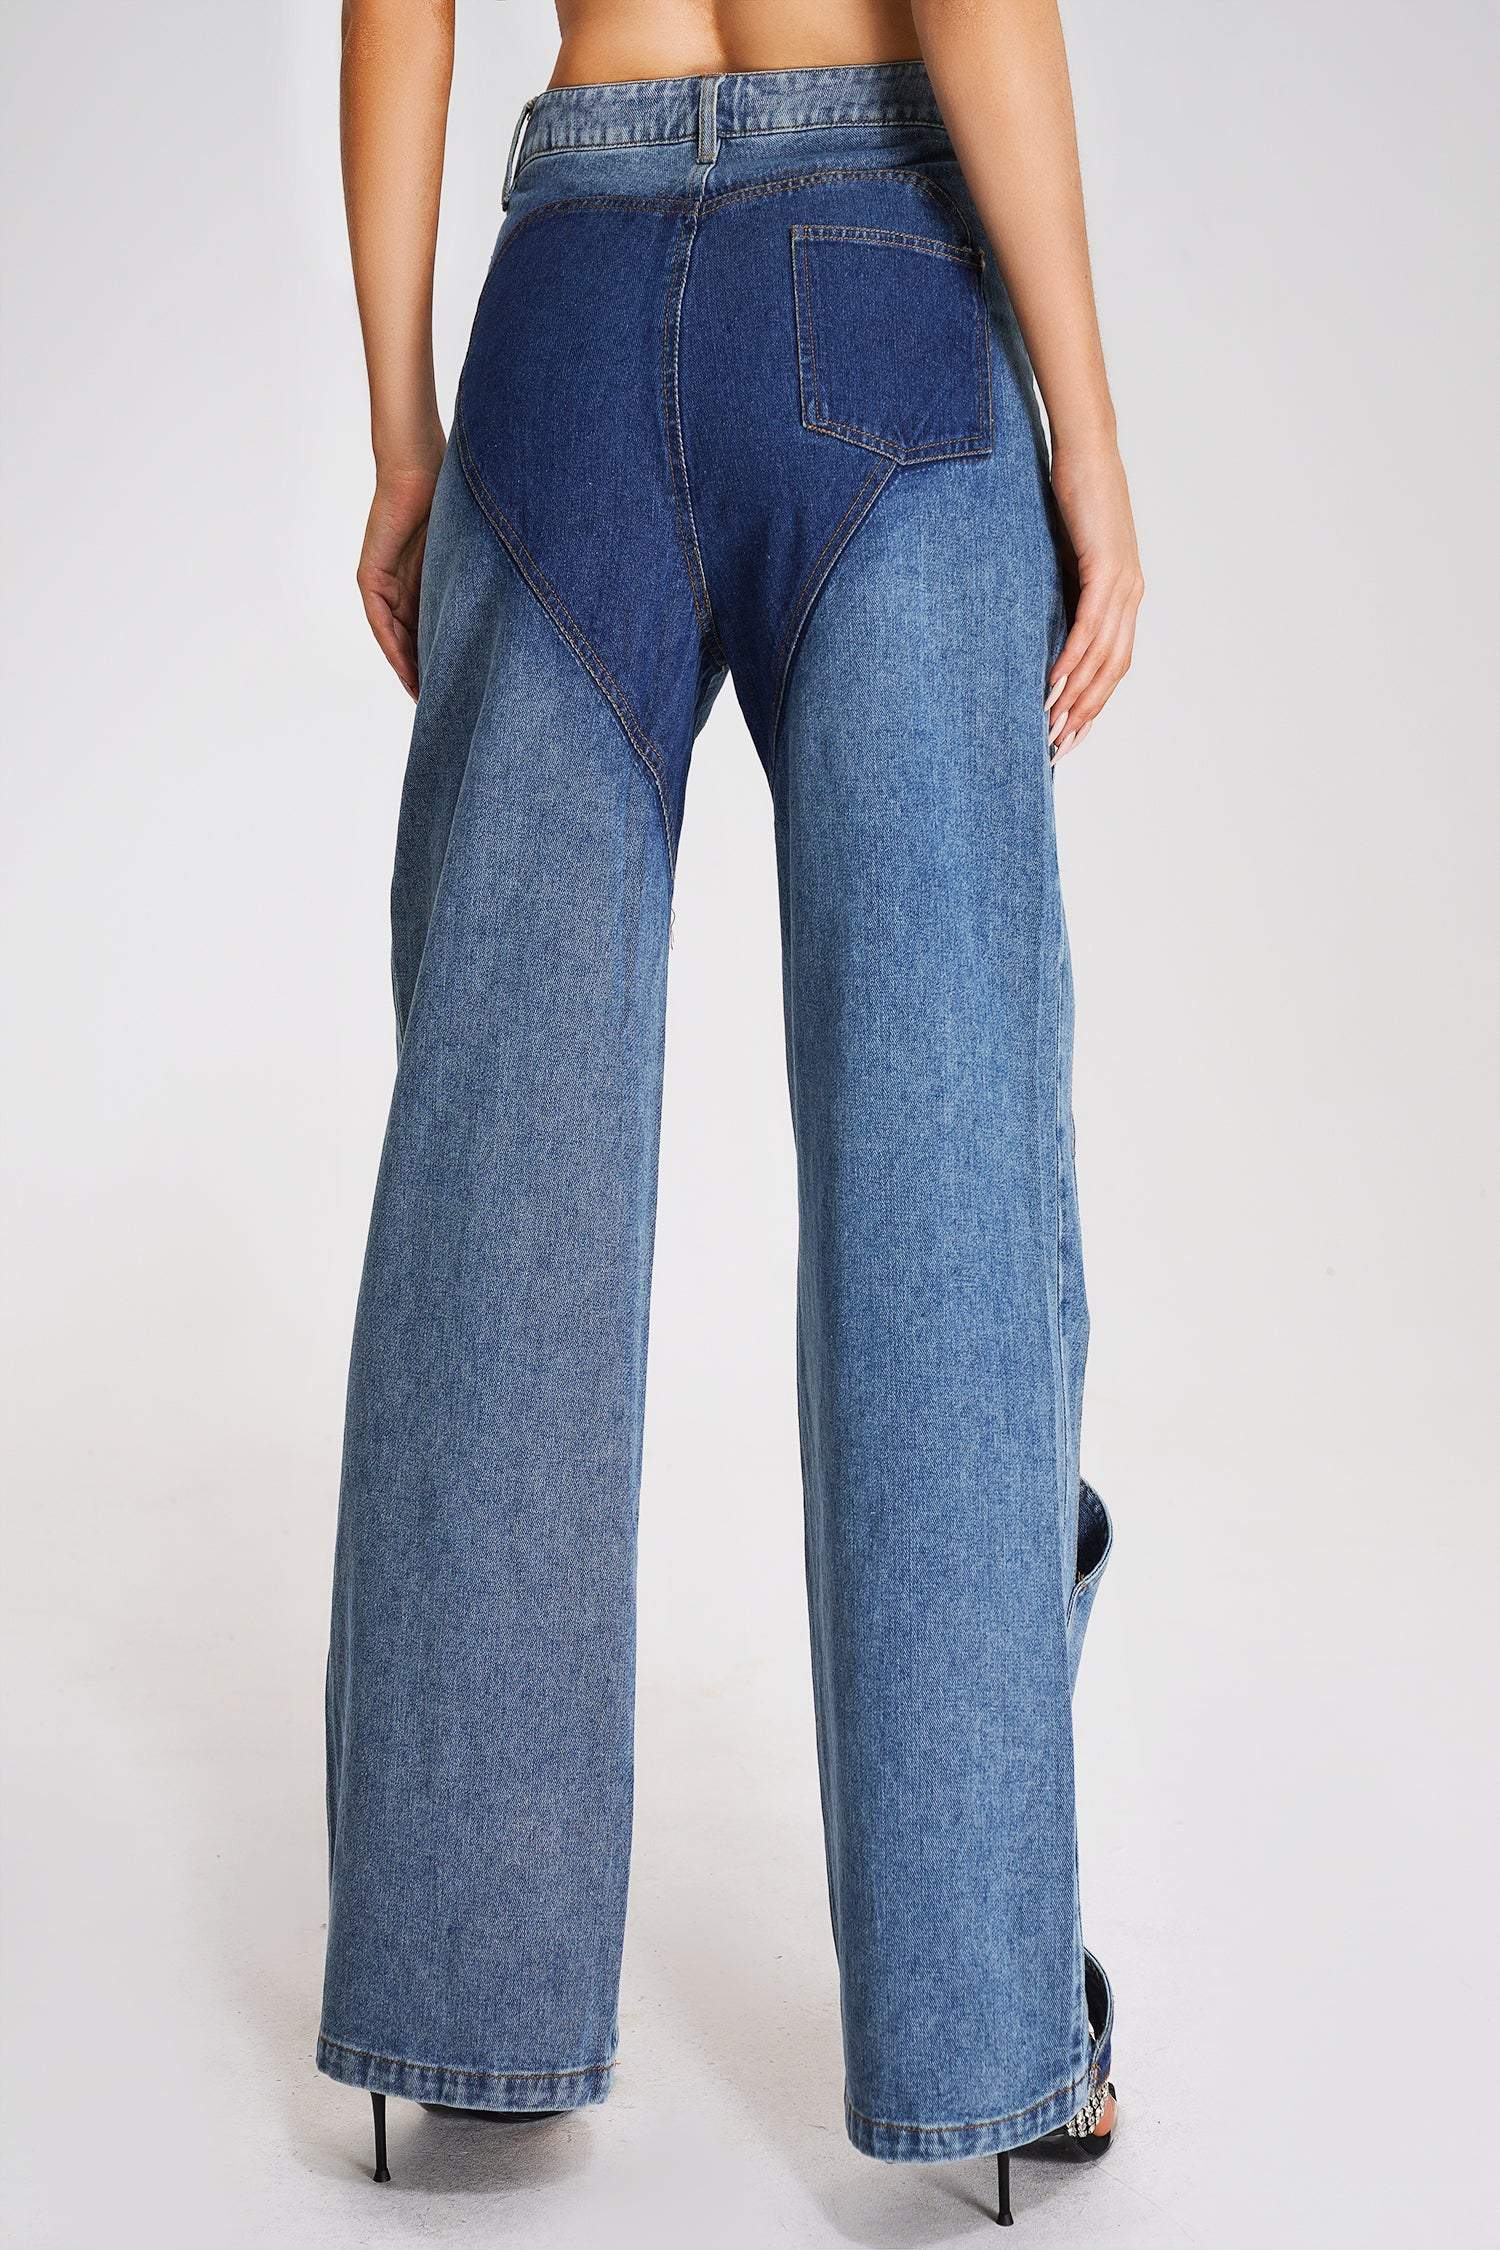 8 Outfits That Prove High-Waisted Jeans Are Eternally Chic  High waisted  jeans outfit, High waist jeans, Denim fashion